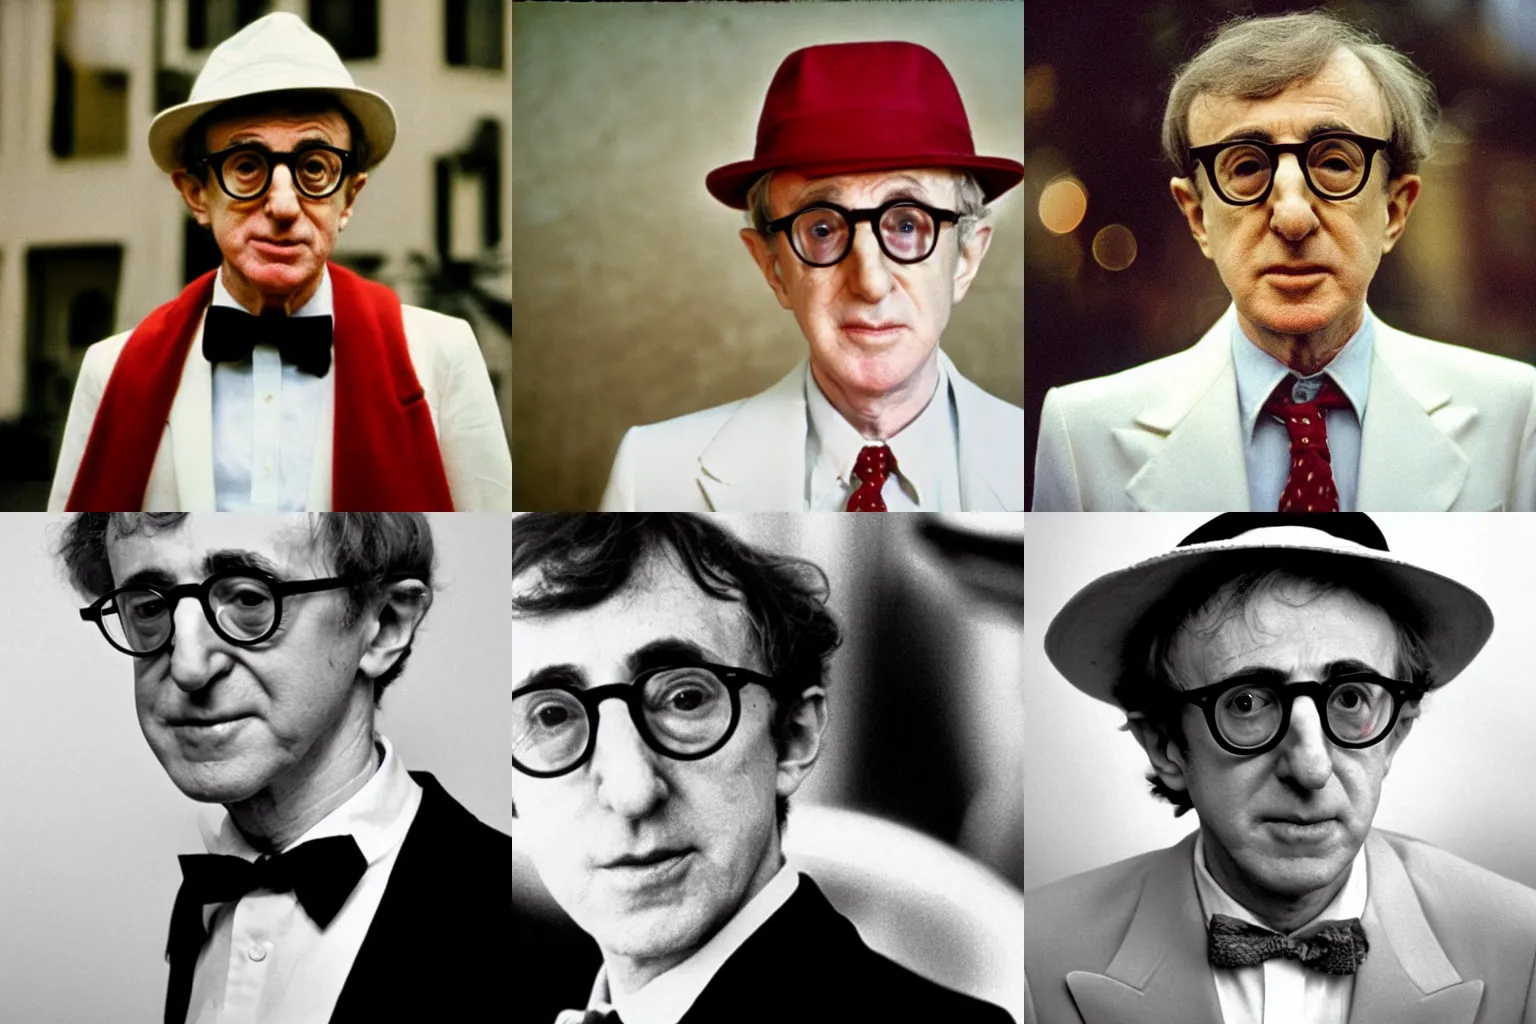 Prompt: close-up photo of Woody Allen in a white suit with a red fez, circa 1977